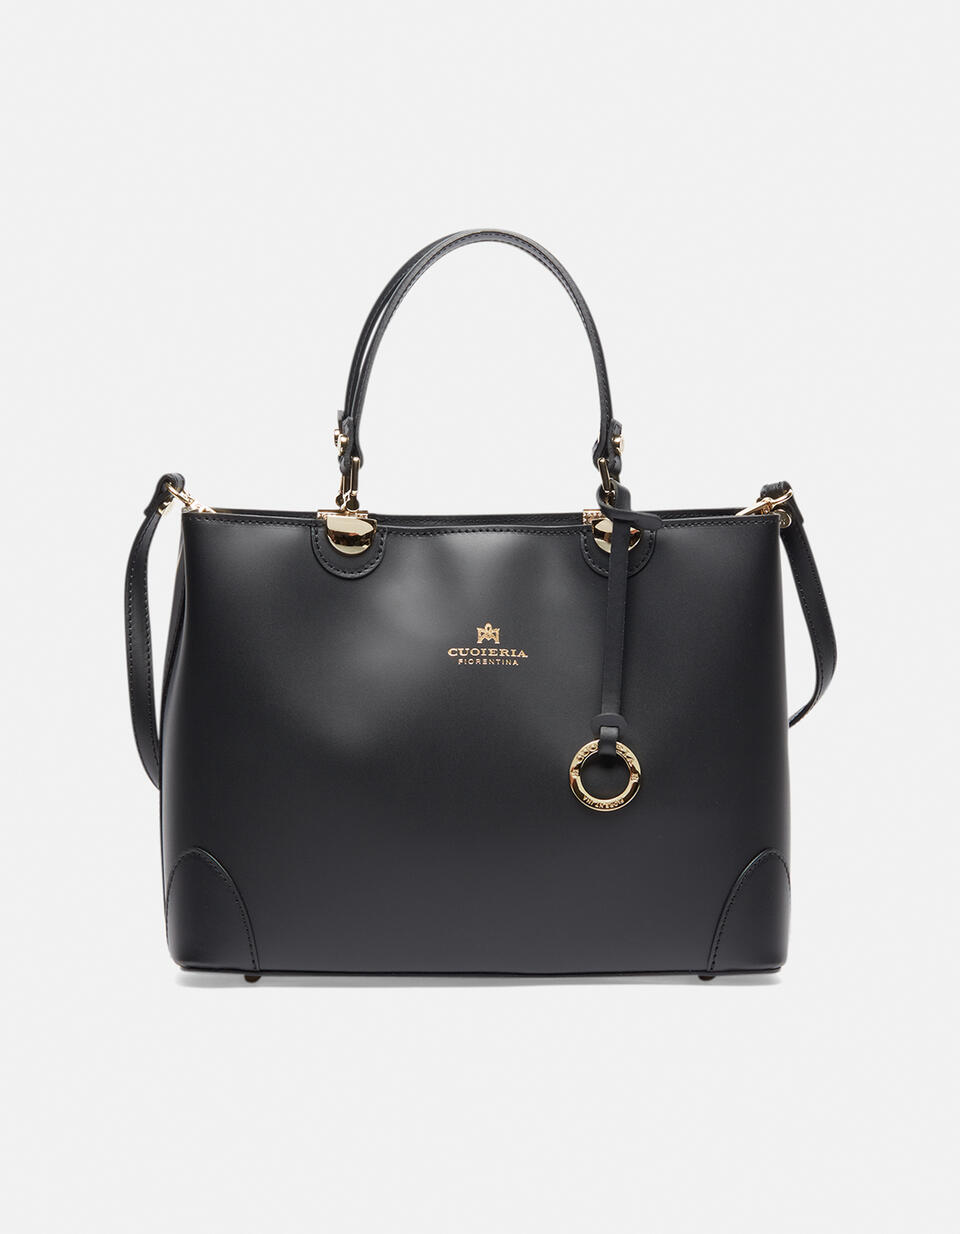 Hand bag in smooth calf leather with metal details - TOTE BAG - WOMEN'S BAGS | bags NERO - TOTE BAG - WOMEN'S BAGS | bagsCuoieria Fiorentina